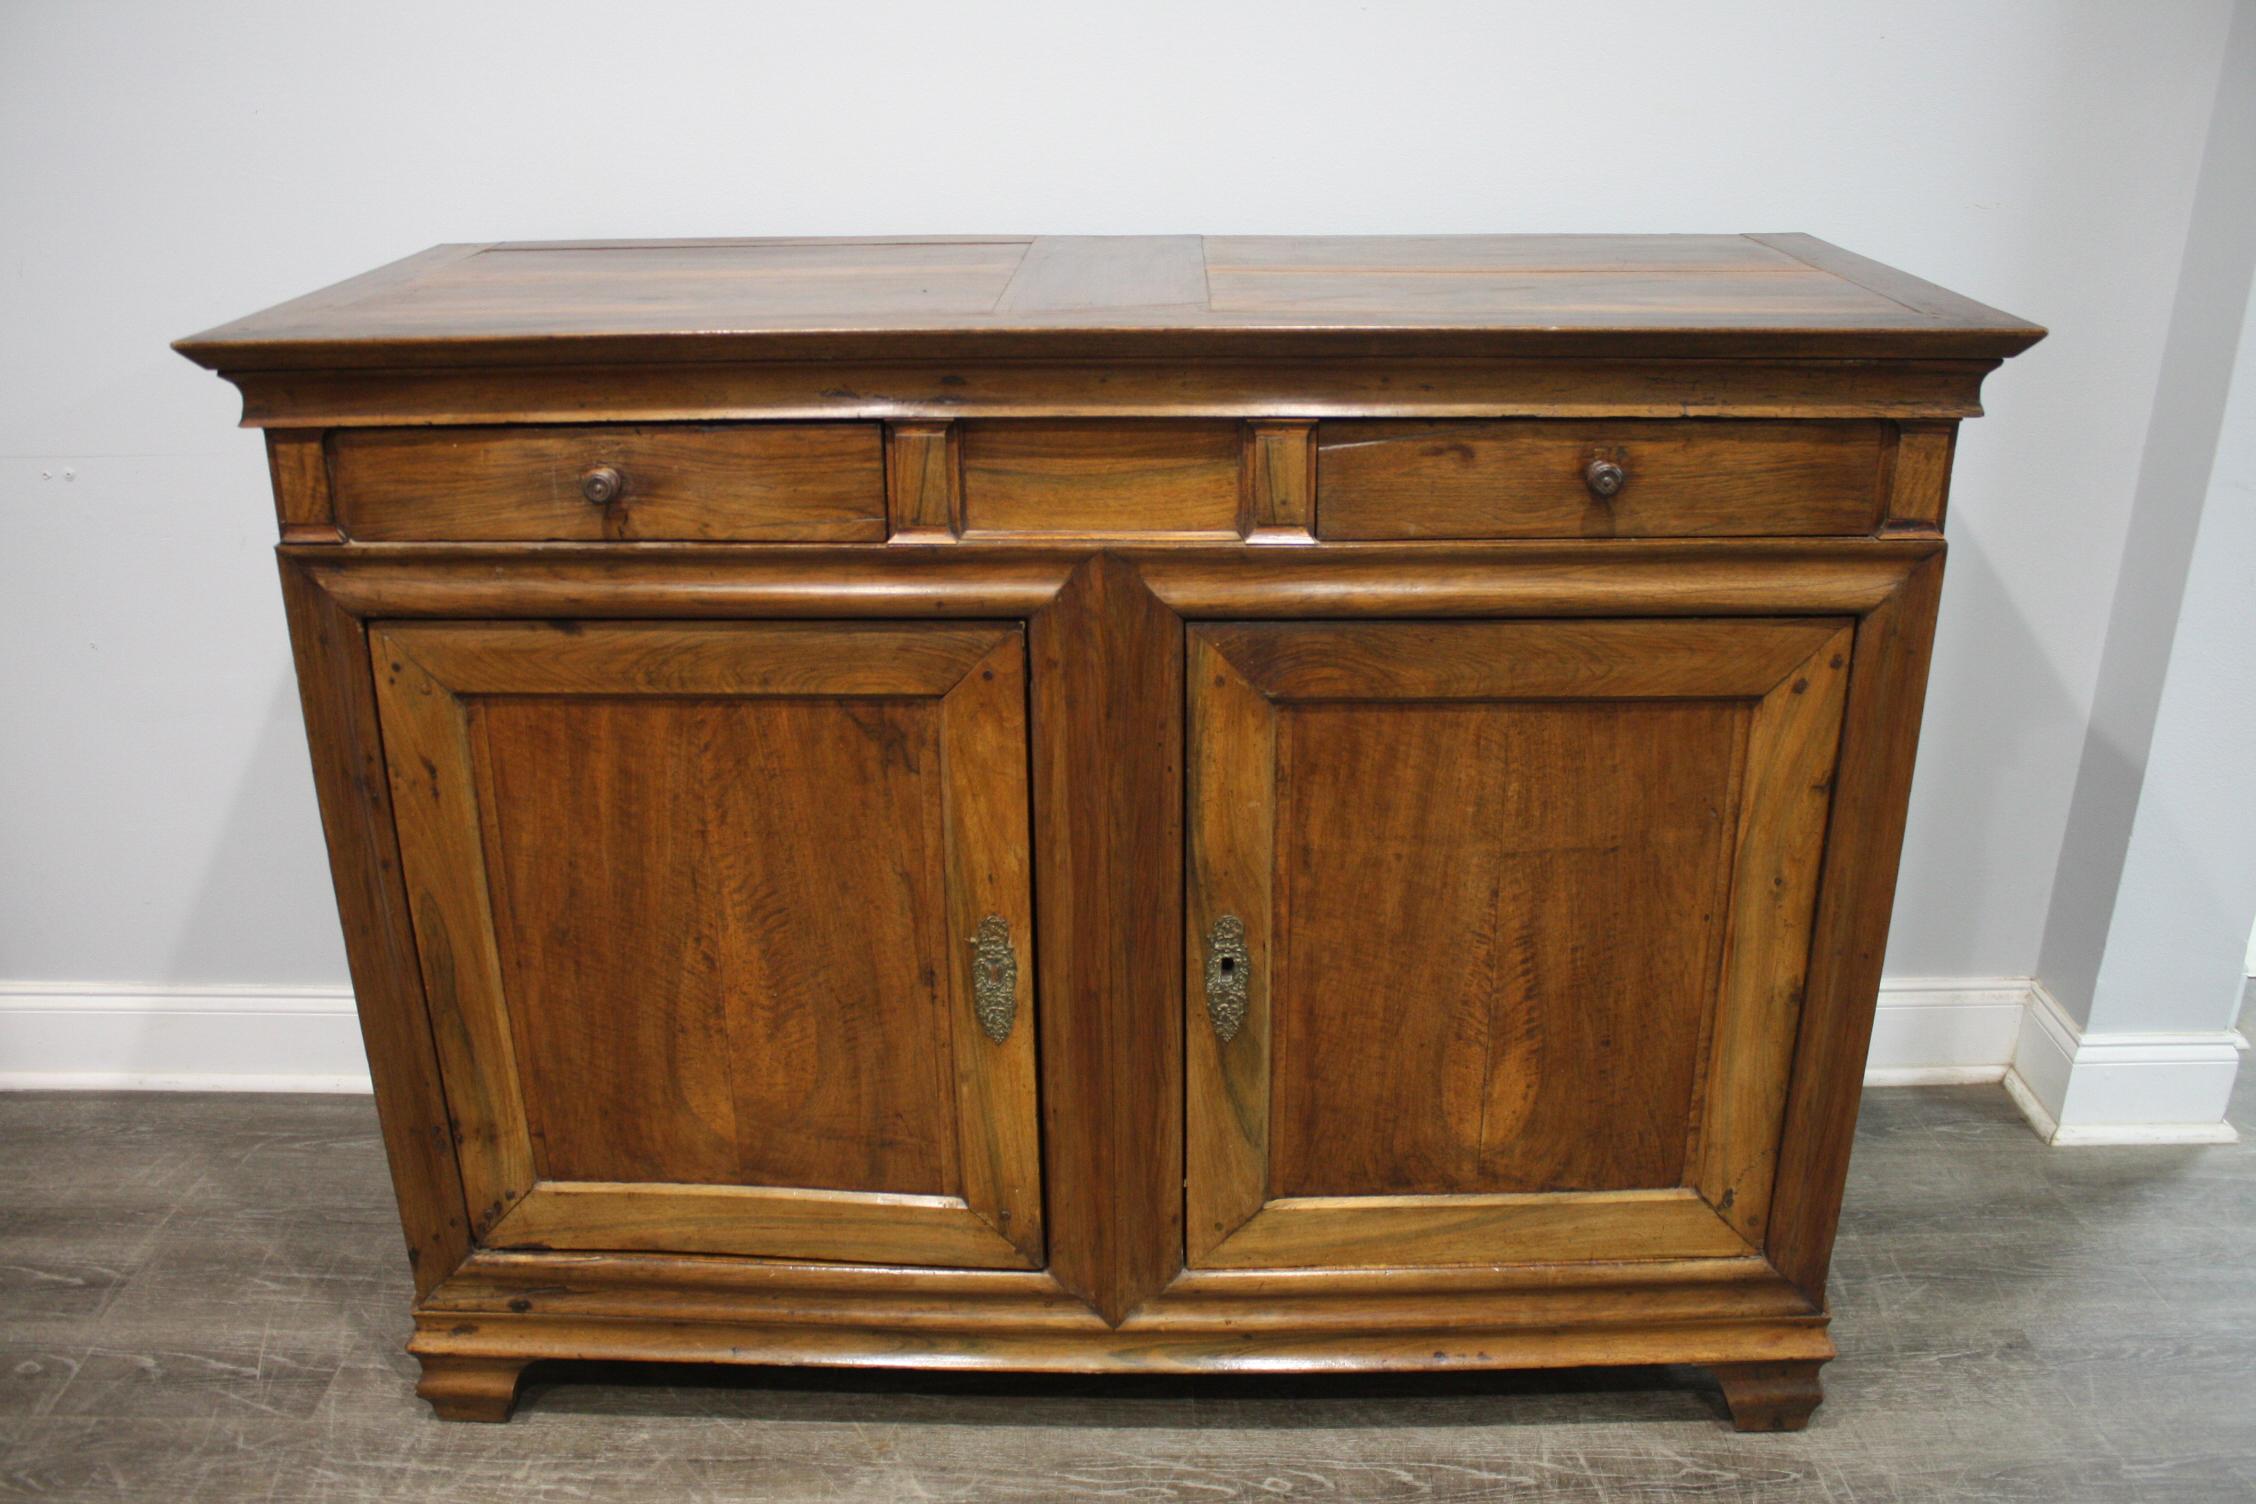 This buffet is made of walnut with the line of the Louis XIV style. Simple and rustic.